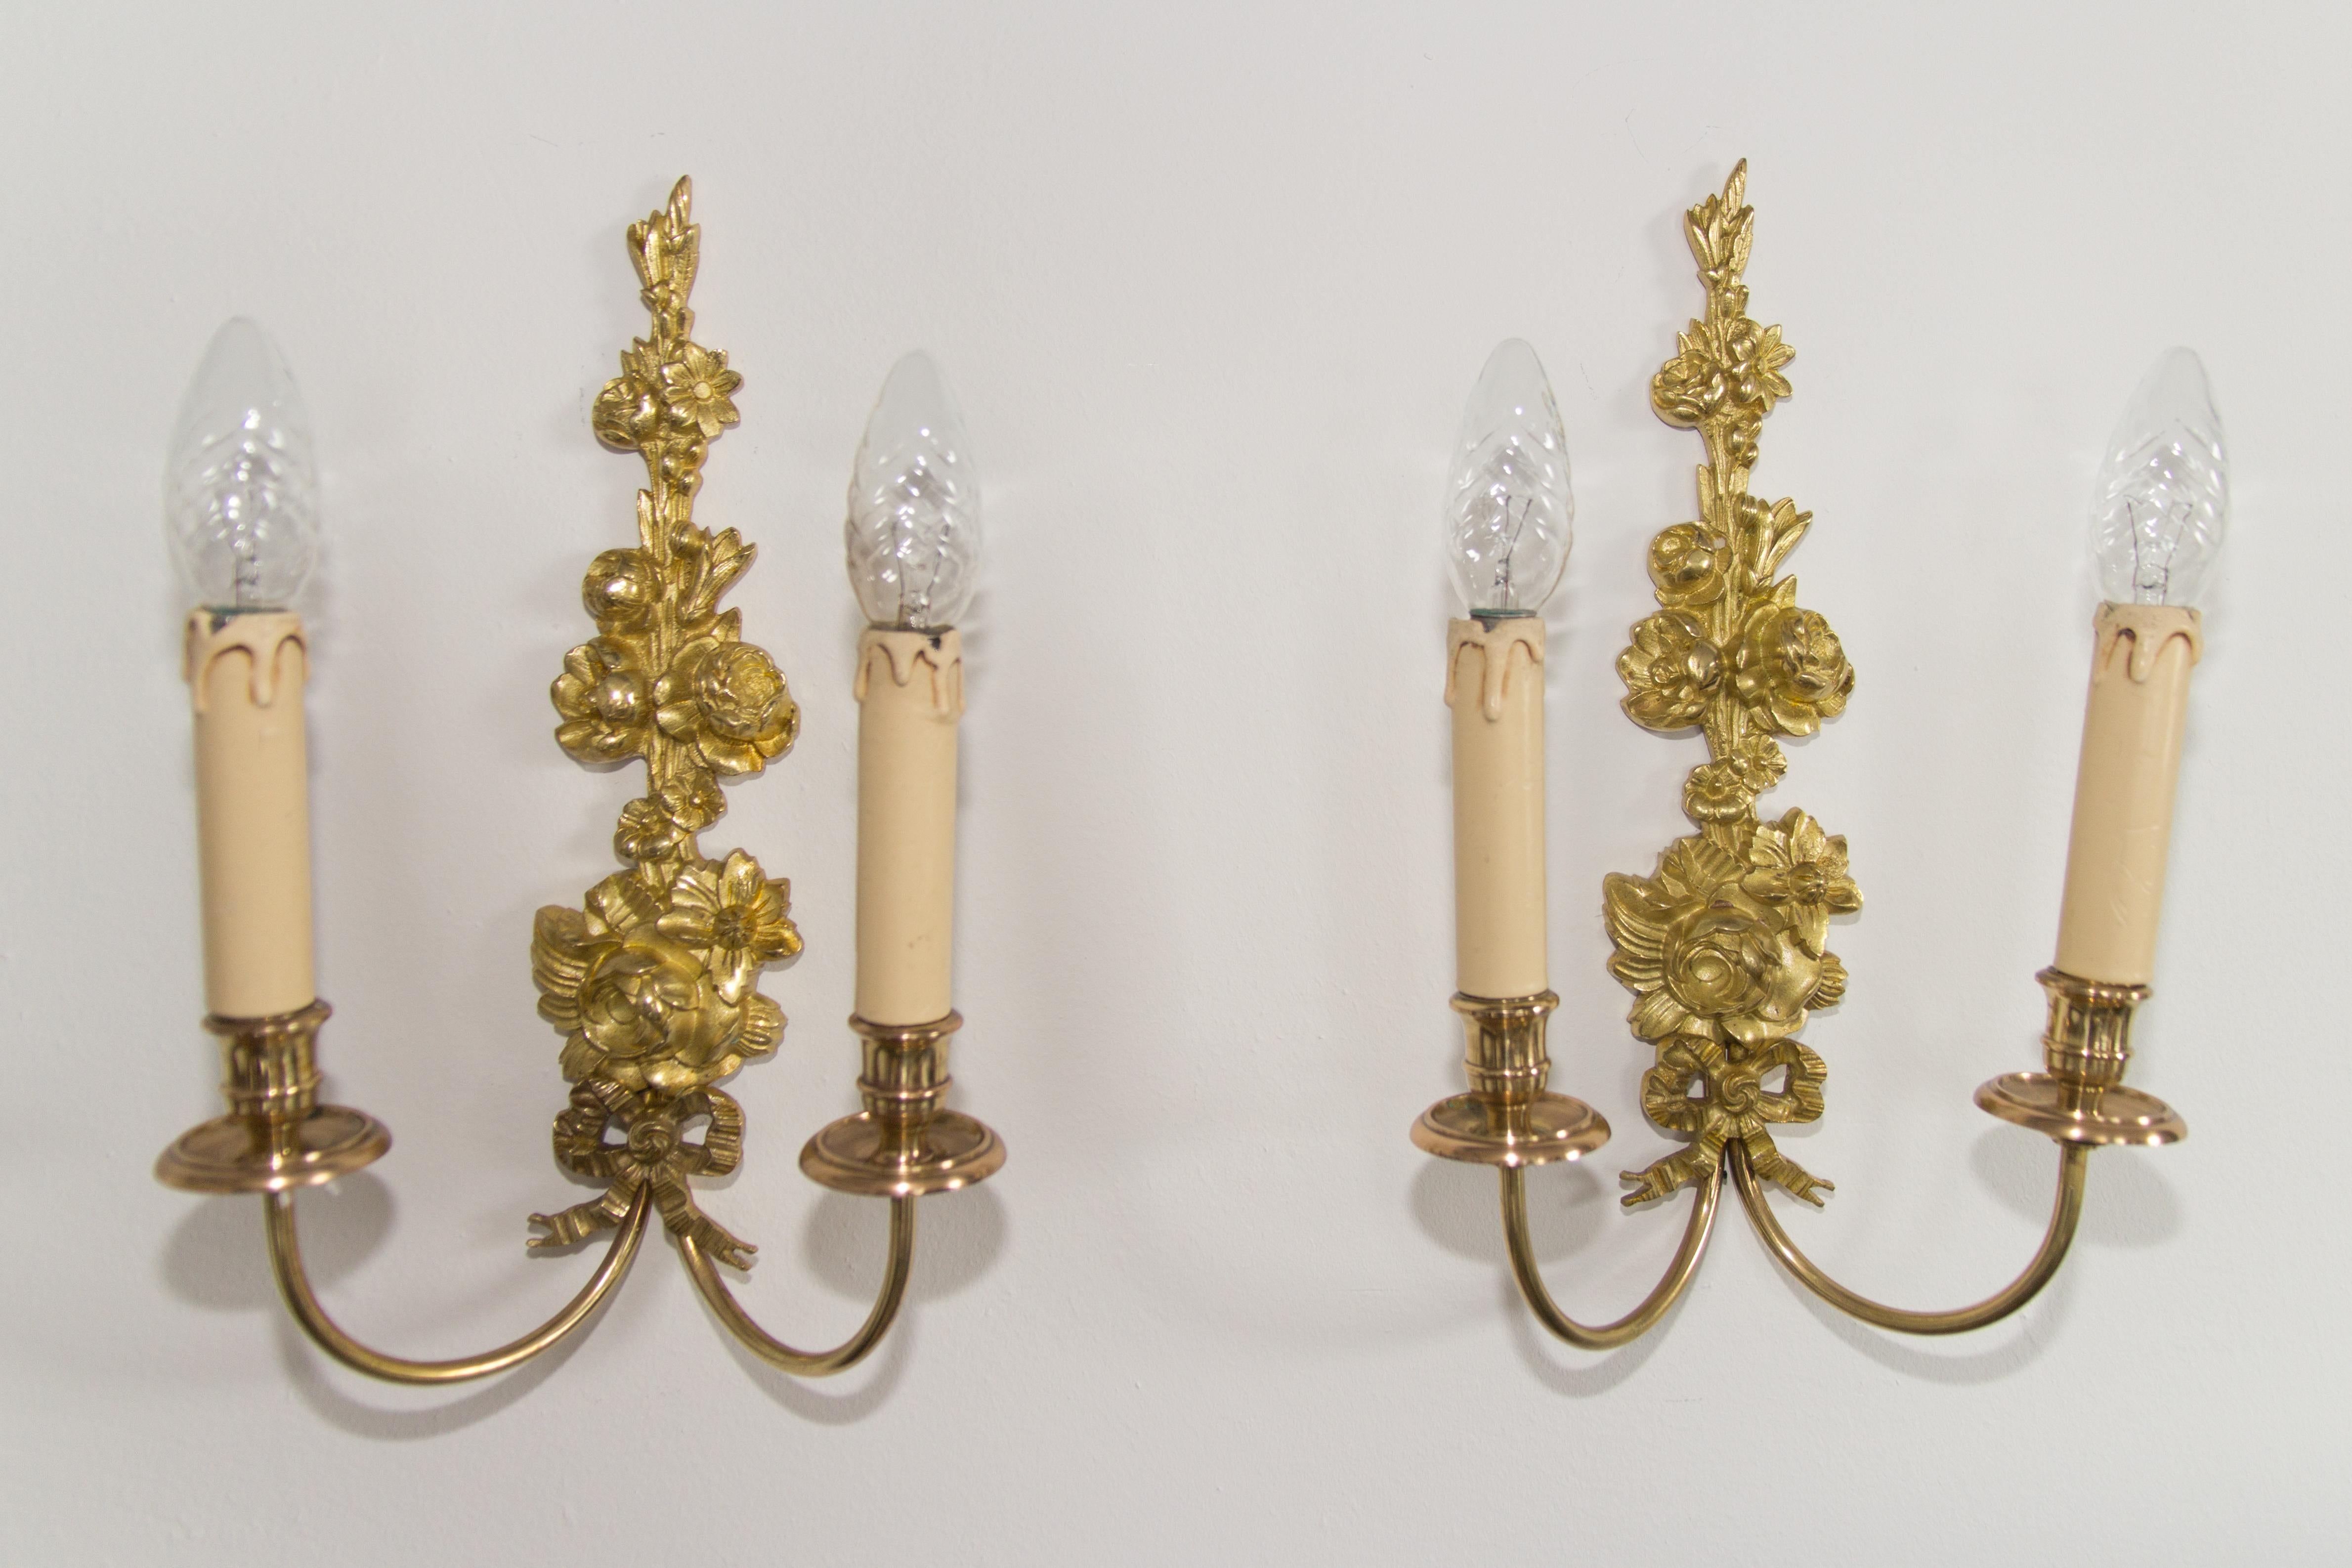 A pair of adorable French Belle Époque style gilt bronze sconces in a form of a beautifully shaped flower bouquet.
Each sconce has two brass arms and each arm has one socket for the E14 size light bulb.